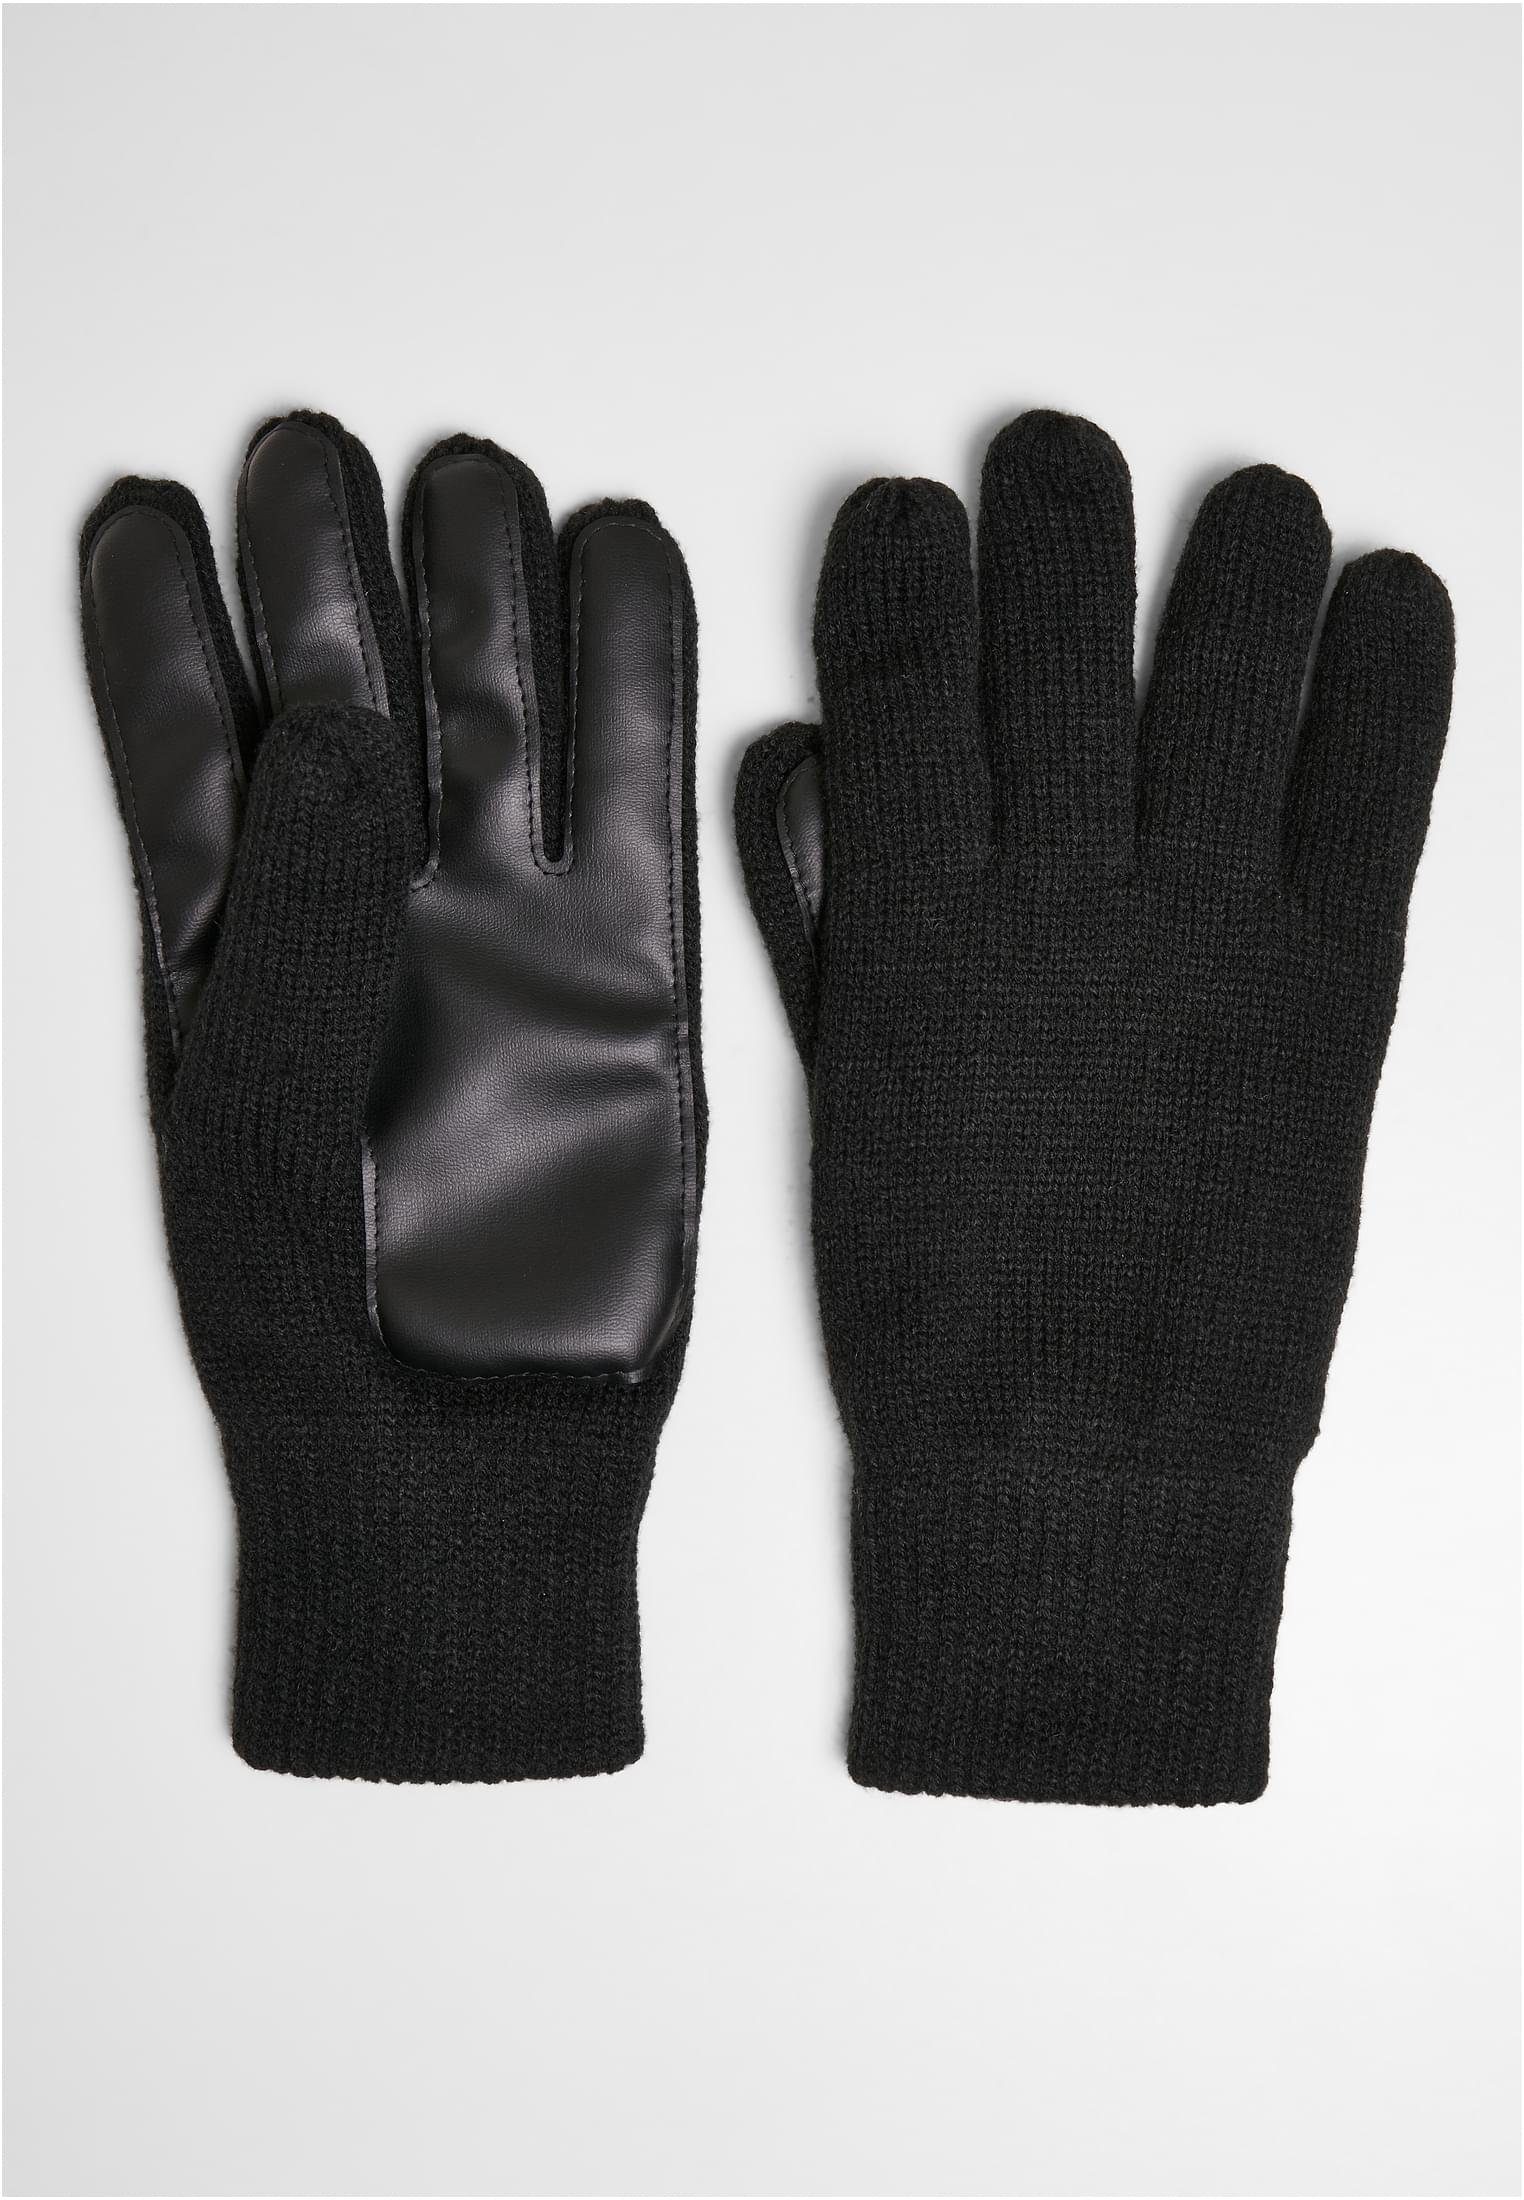 Baumwollhandschuhe Synthetic Gloves CLASSICS URBAN Leather Knit Unisex